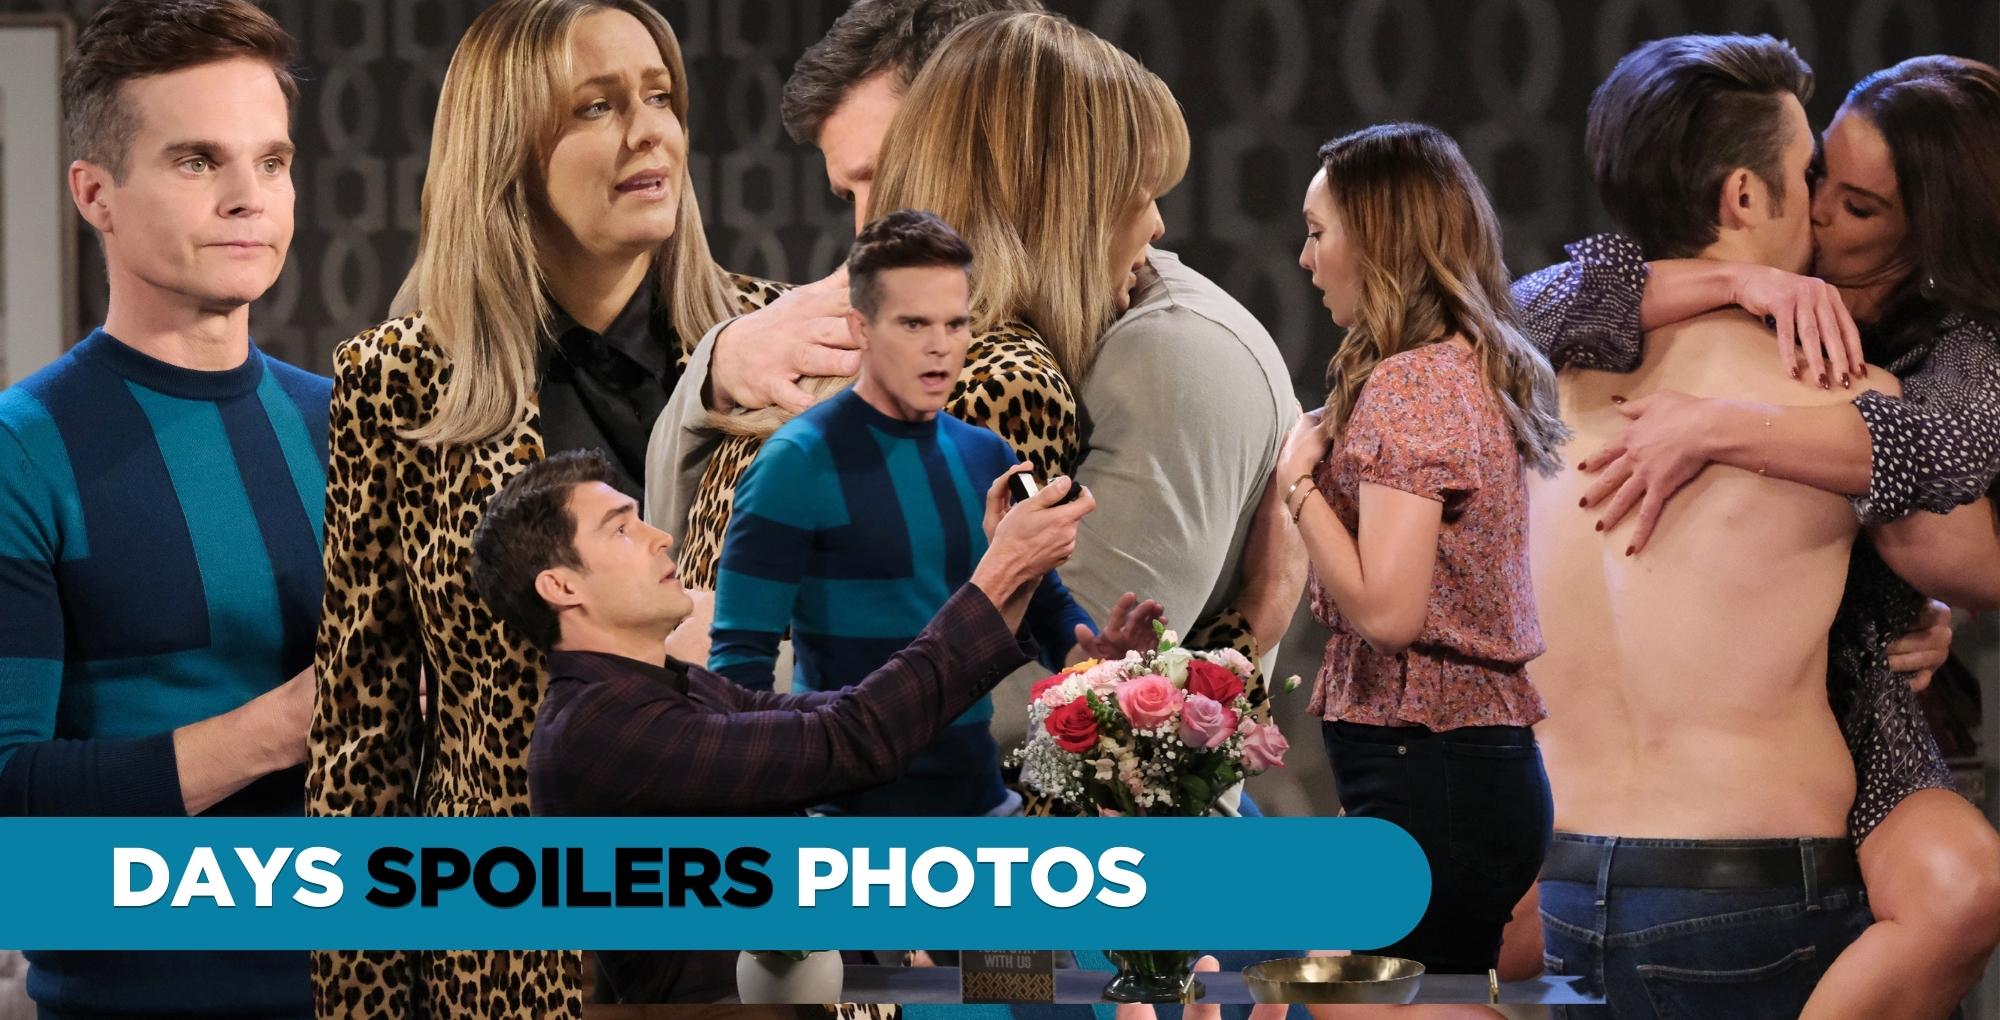 days spoilers photos collage.